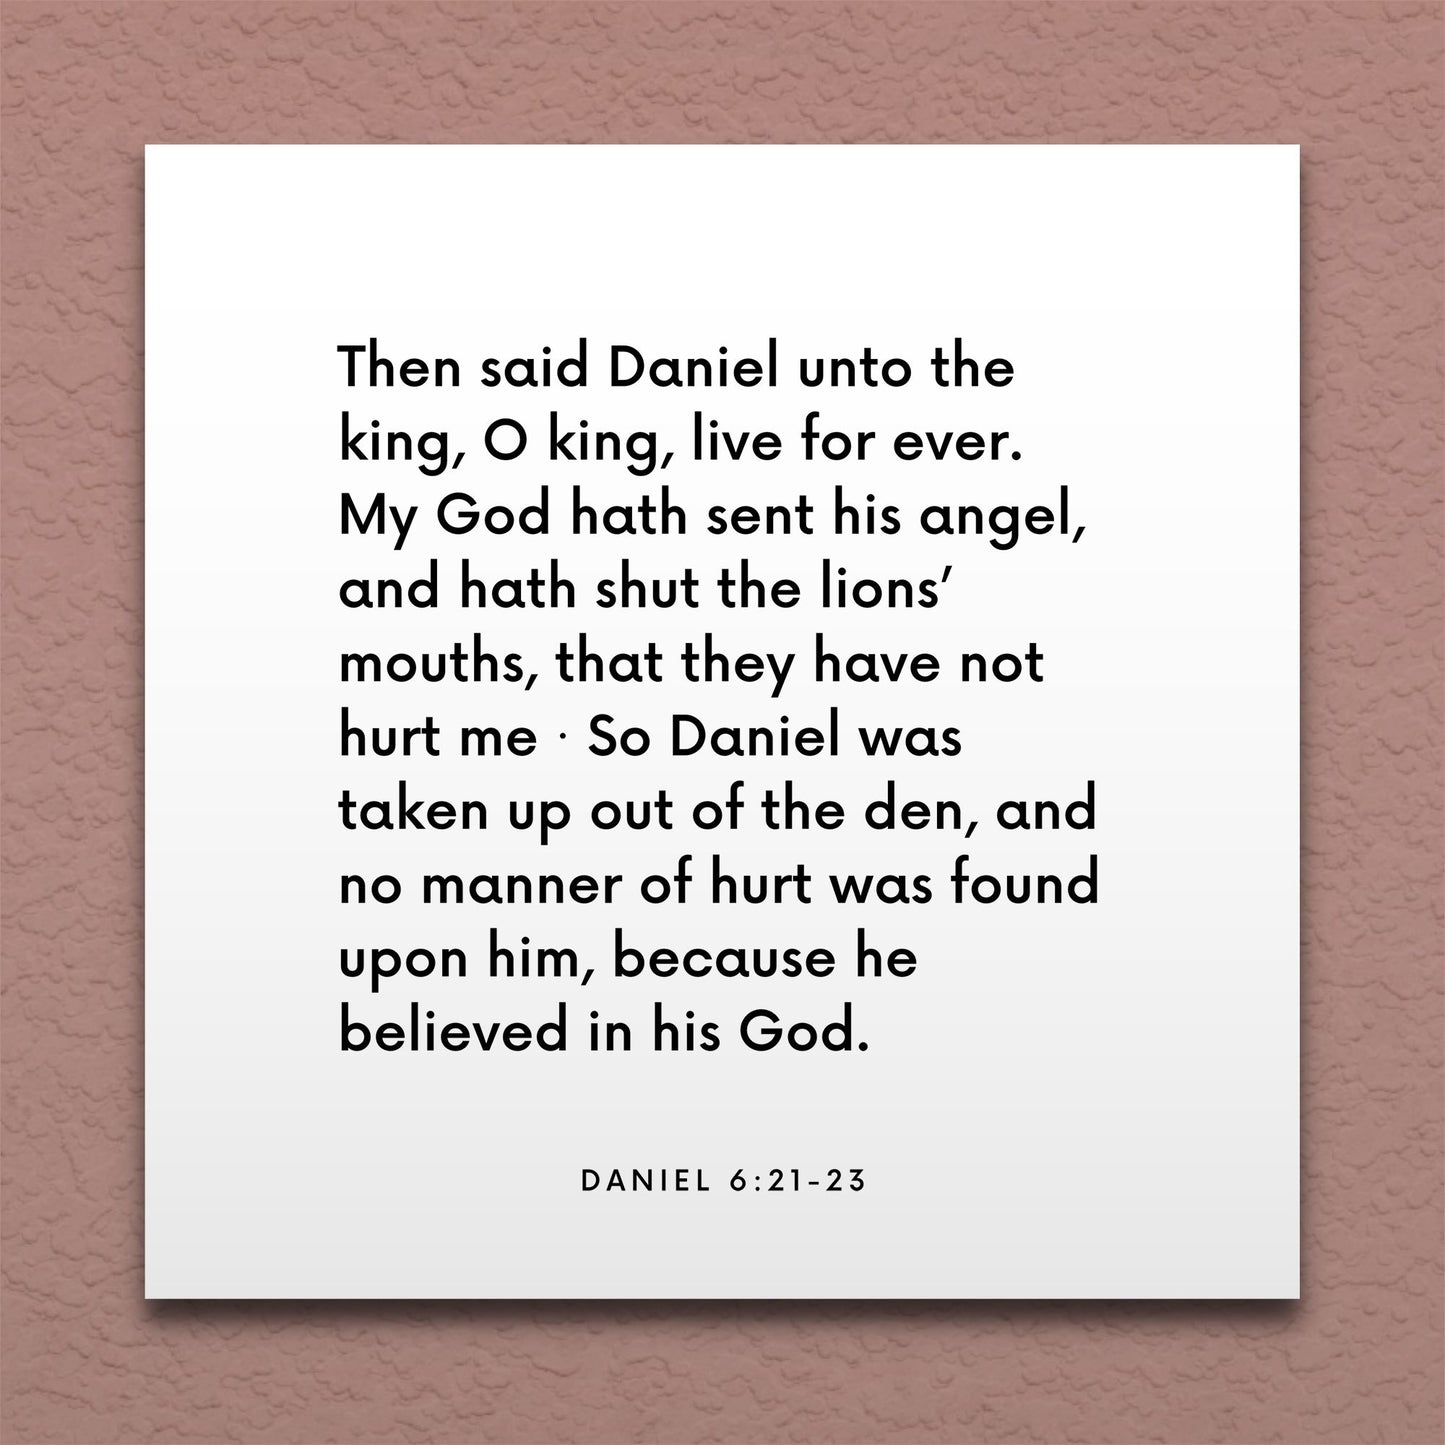 Wall-mounted scripture tile for Daniel 6:21-23 - "My God hath sent his angel, and hath shut the lions’ mouths"